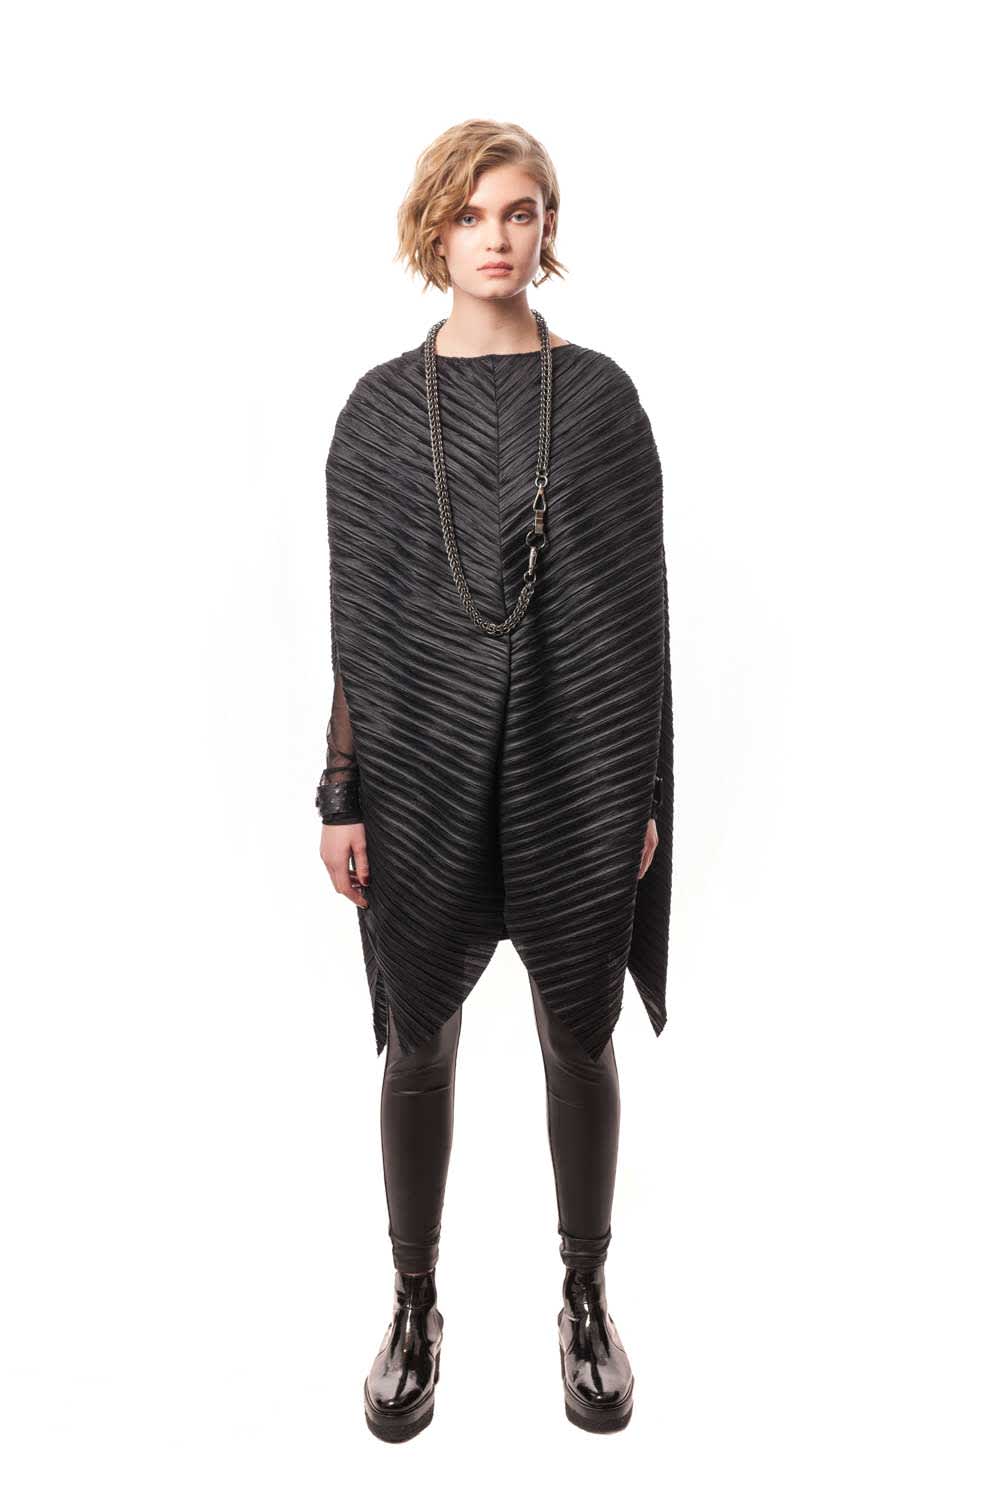 Oversized Pleated Poncho Dress.  Wear it as a dress, overlay, or poncho. Featuring a cutting-edge silhouette, multiple styling options